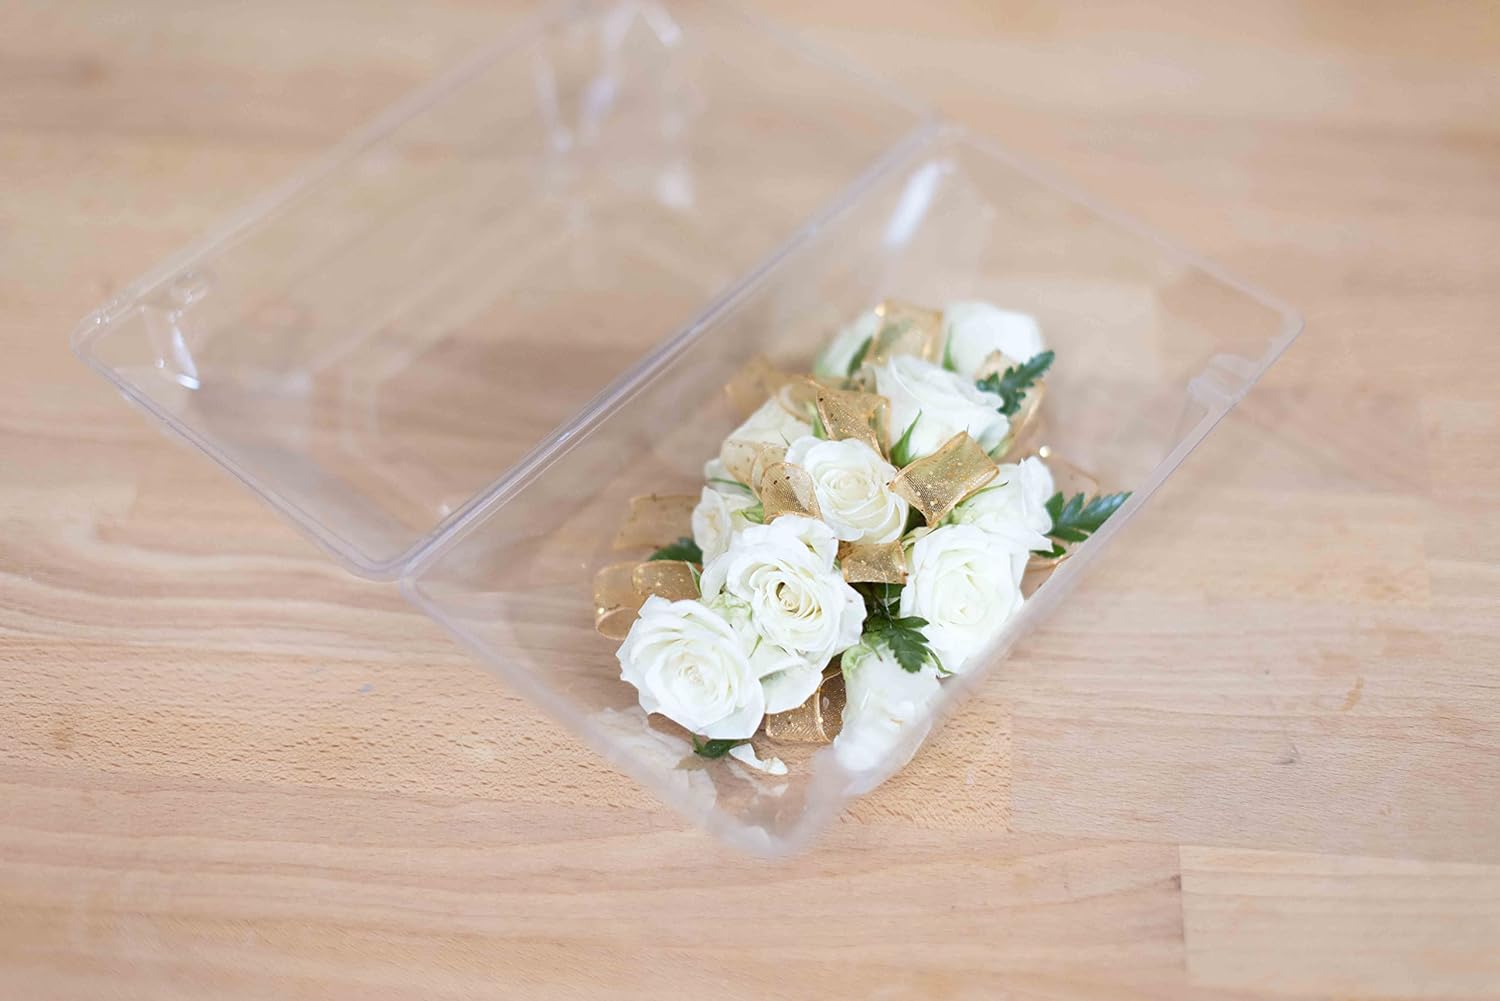 How To Store A Corsage